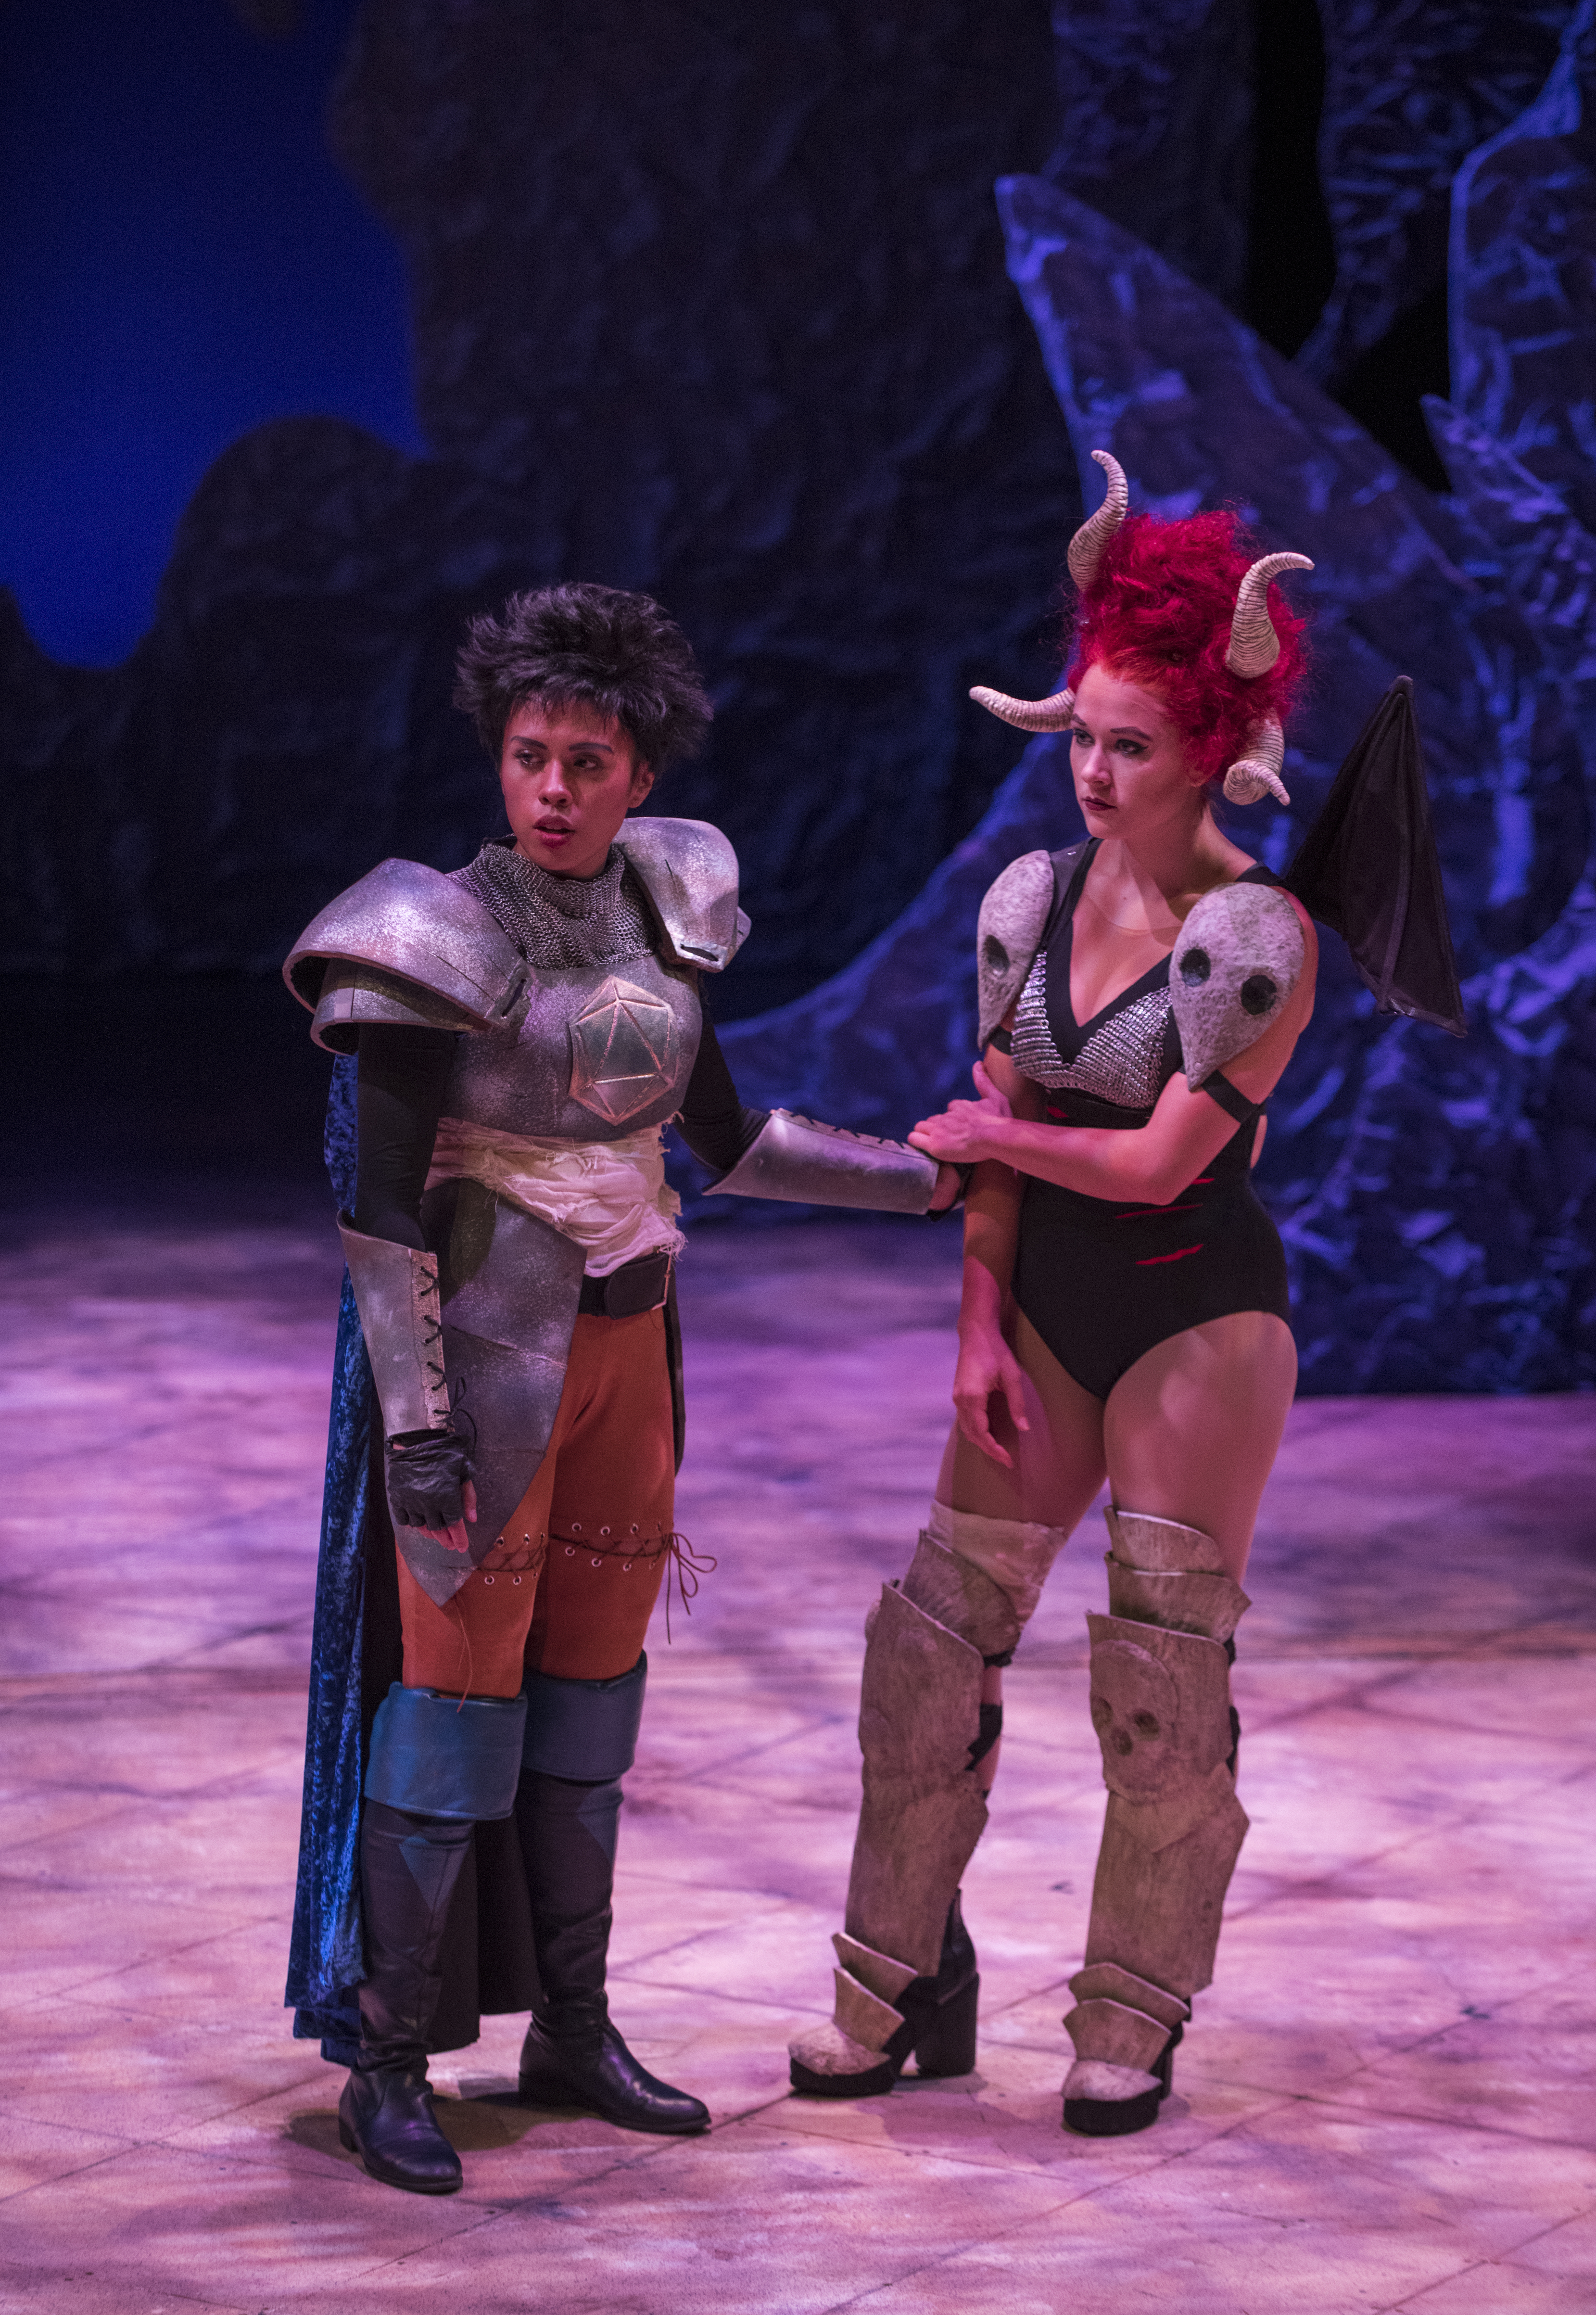 Production photo of two actors in costume, one in armor and one with a horned wig, from a production of She Kills Monsters